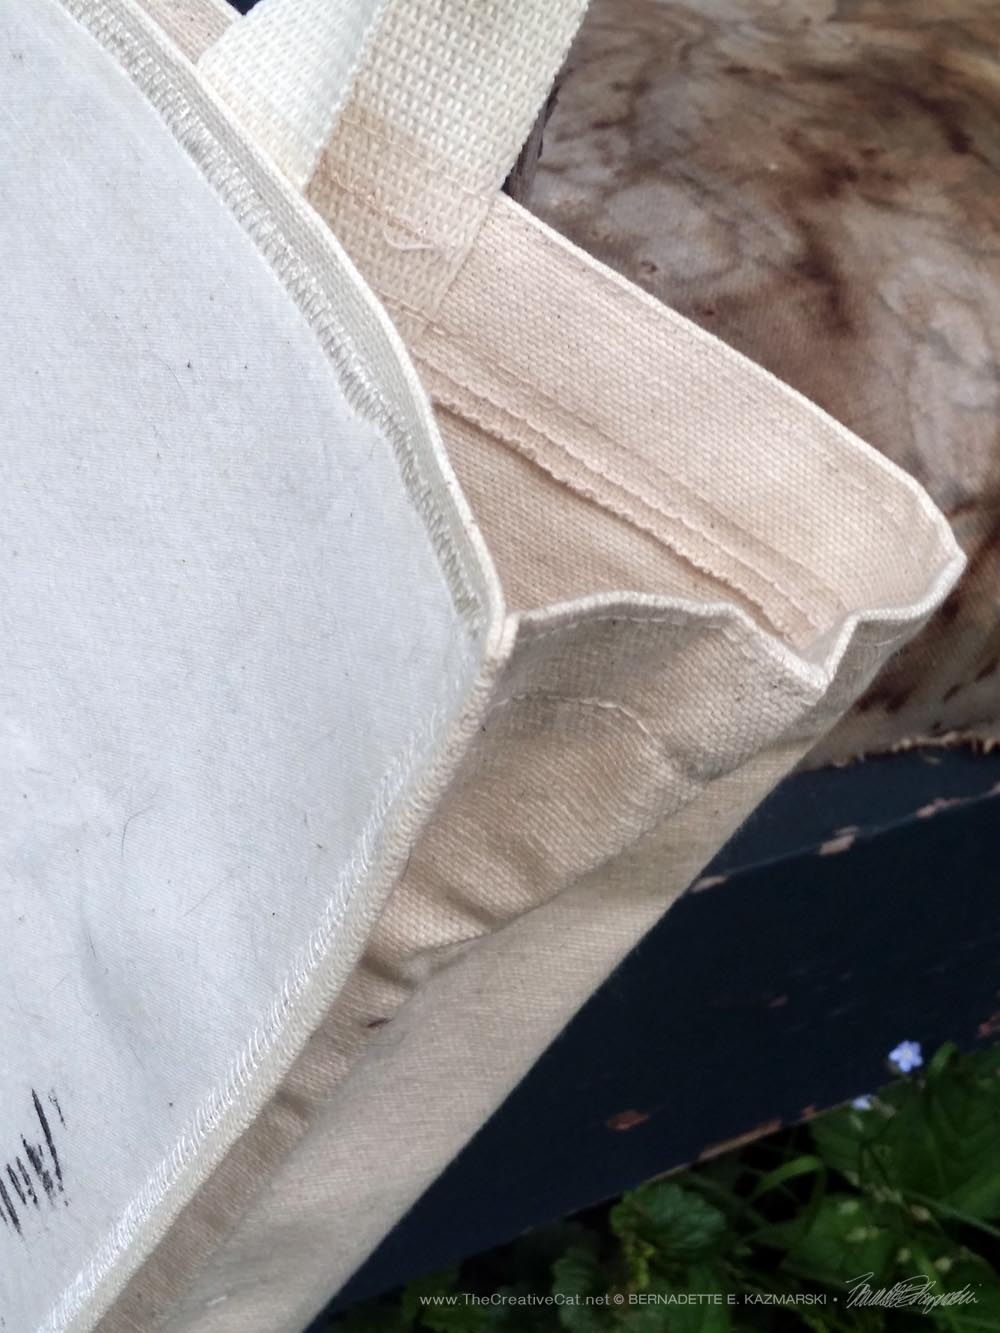 Edge-stitching on the tote bags.